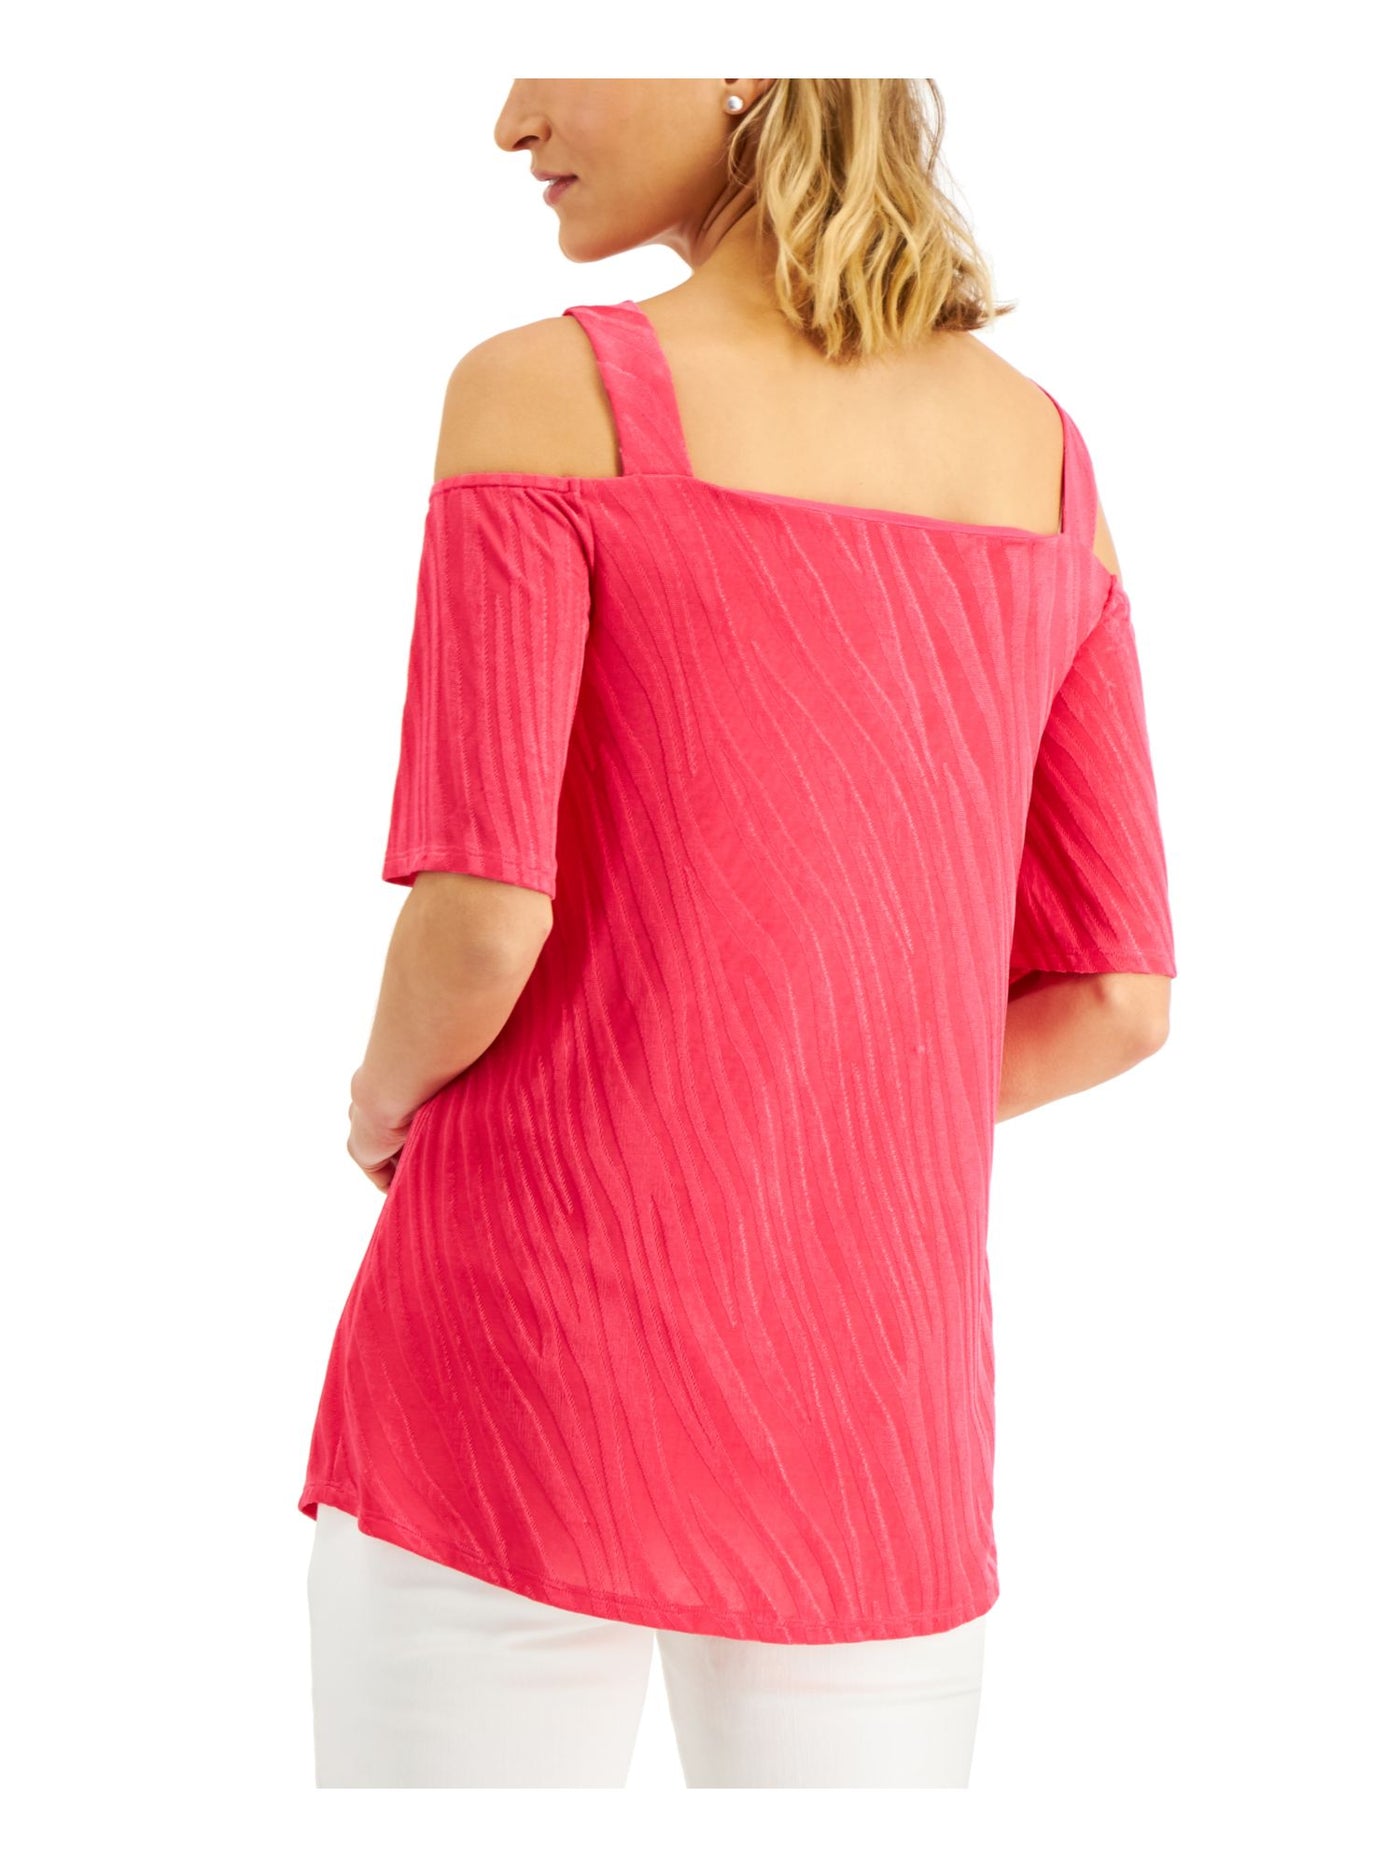 JM COLLECTION Womens Pink Cold Shoulder Relaxed Fit Short Sleeve Square Neck Wear To Work Top M